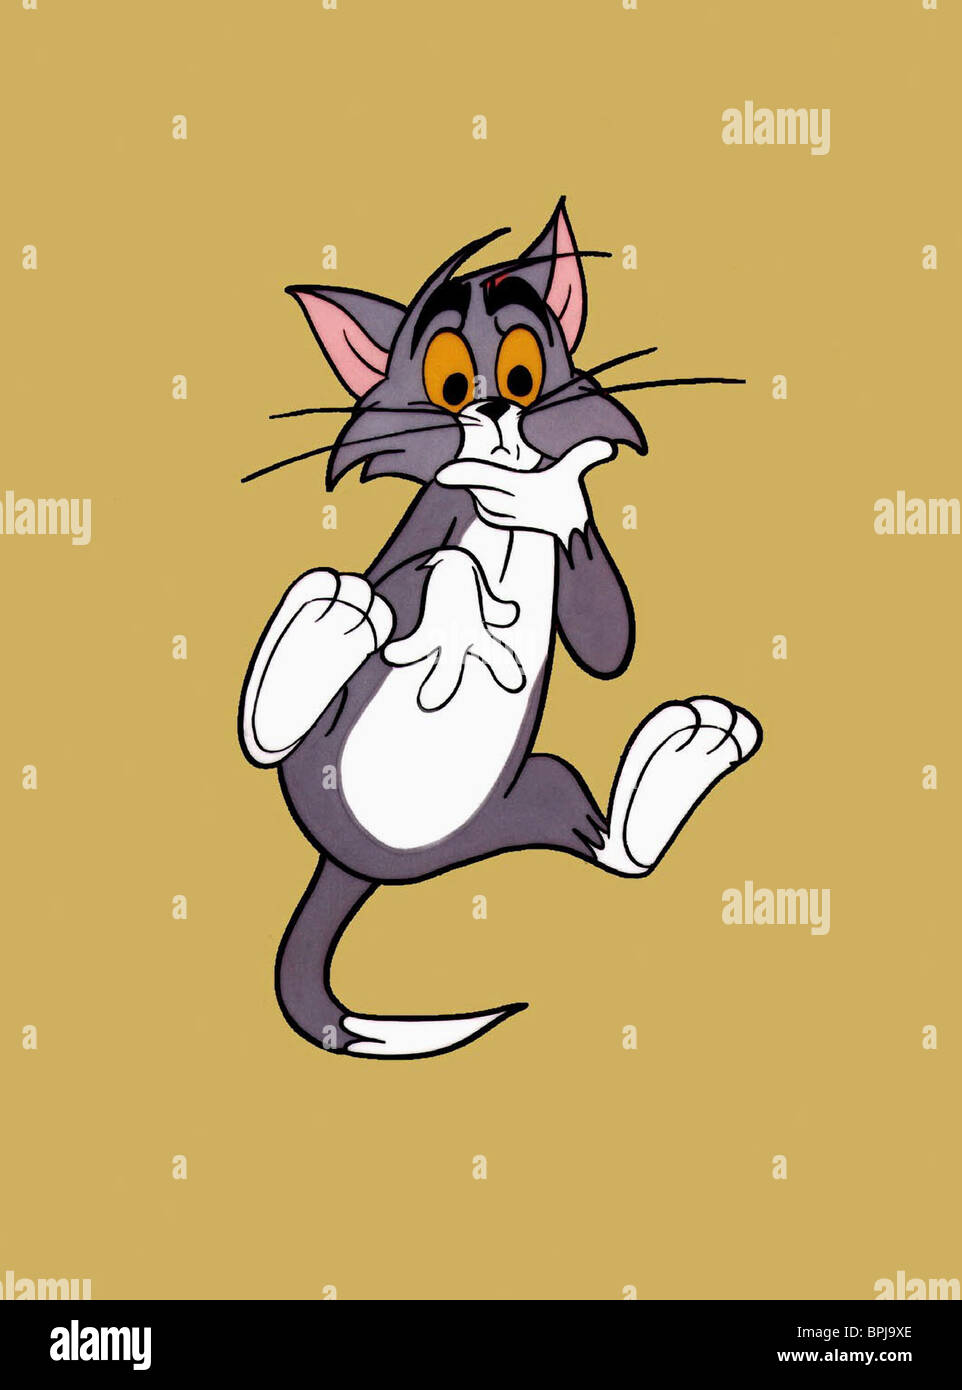 Tom jerry william hanna joseph barbera hi-res stock photography and images  - Alamy